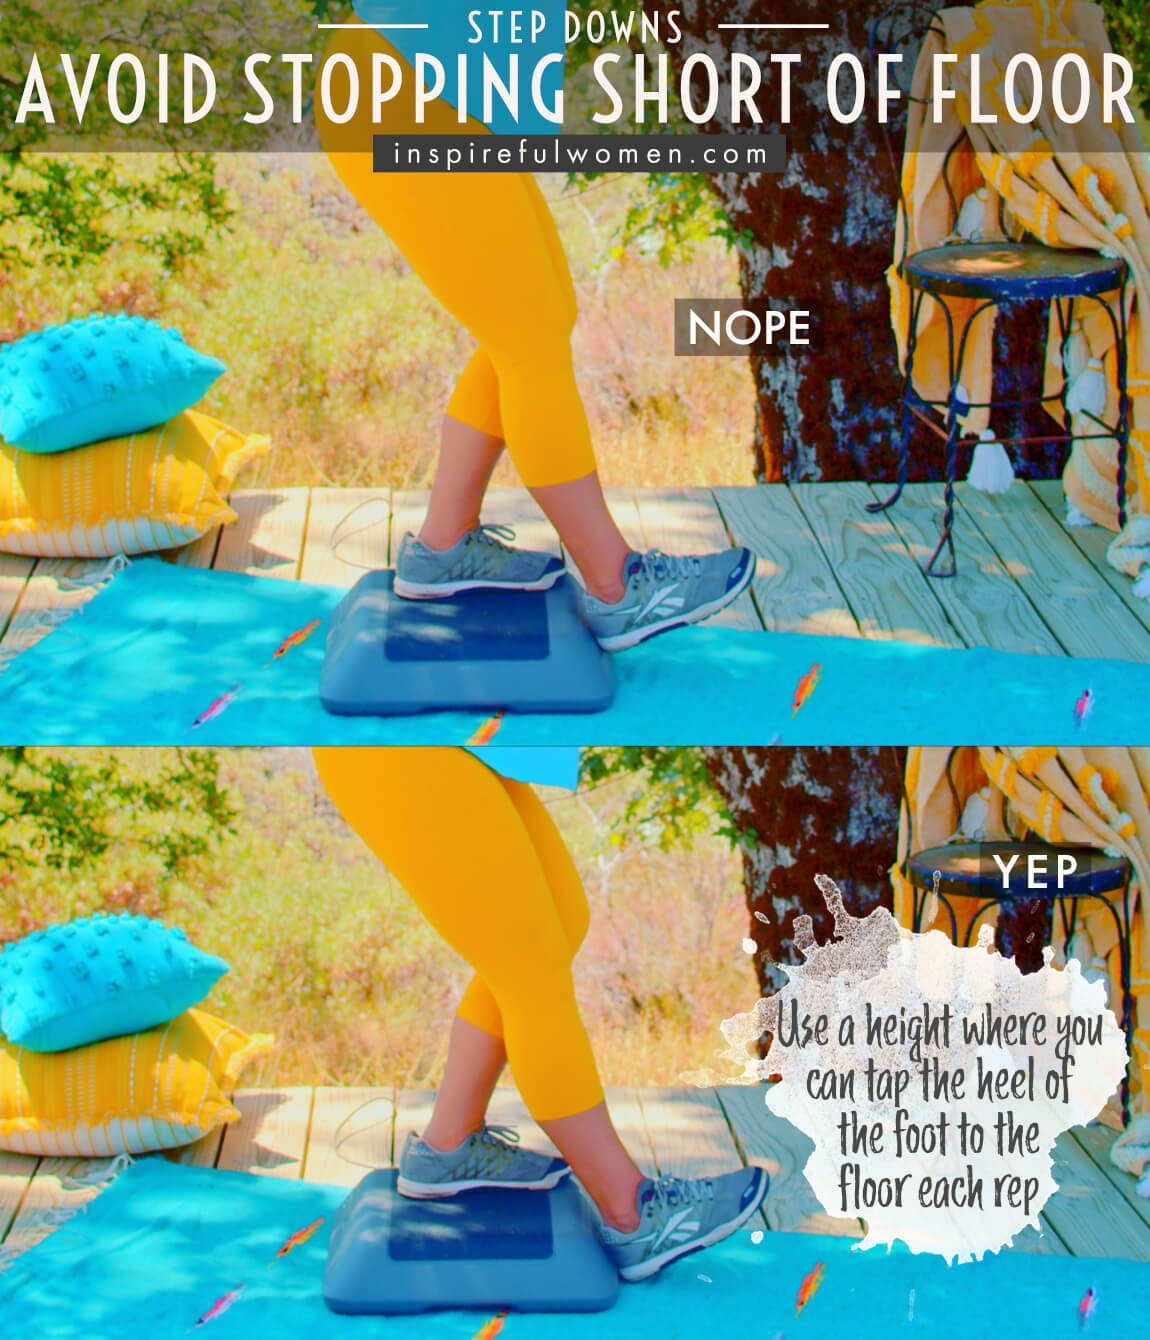 avoid-stopping-short-of-floor-box-step-downs-common-mistakes